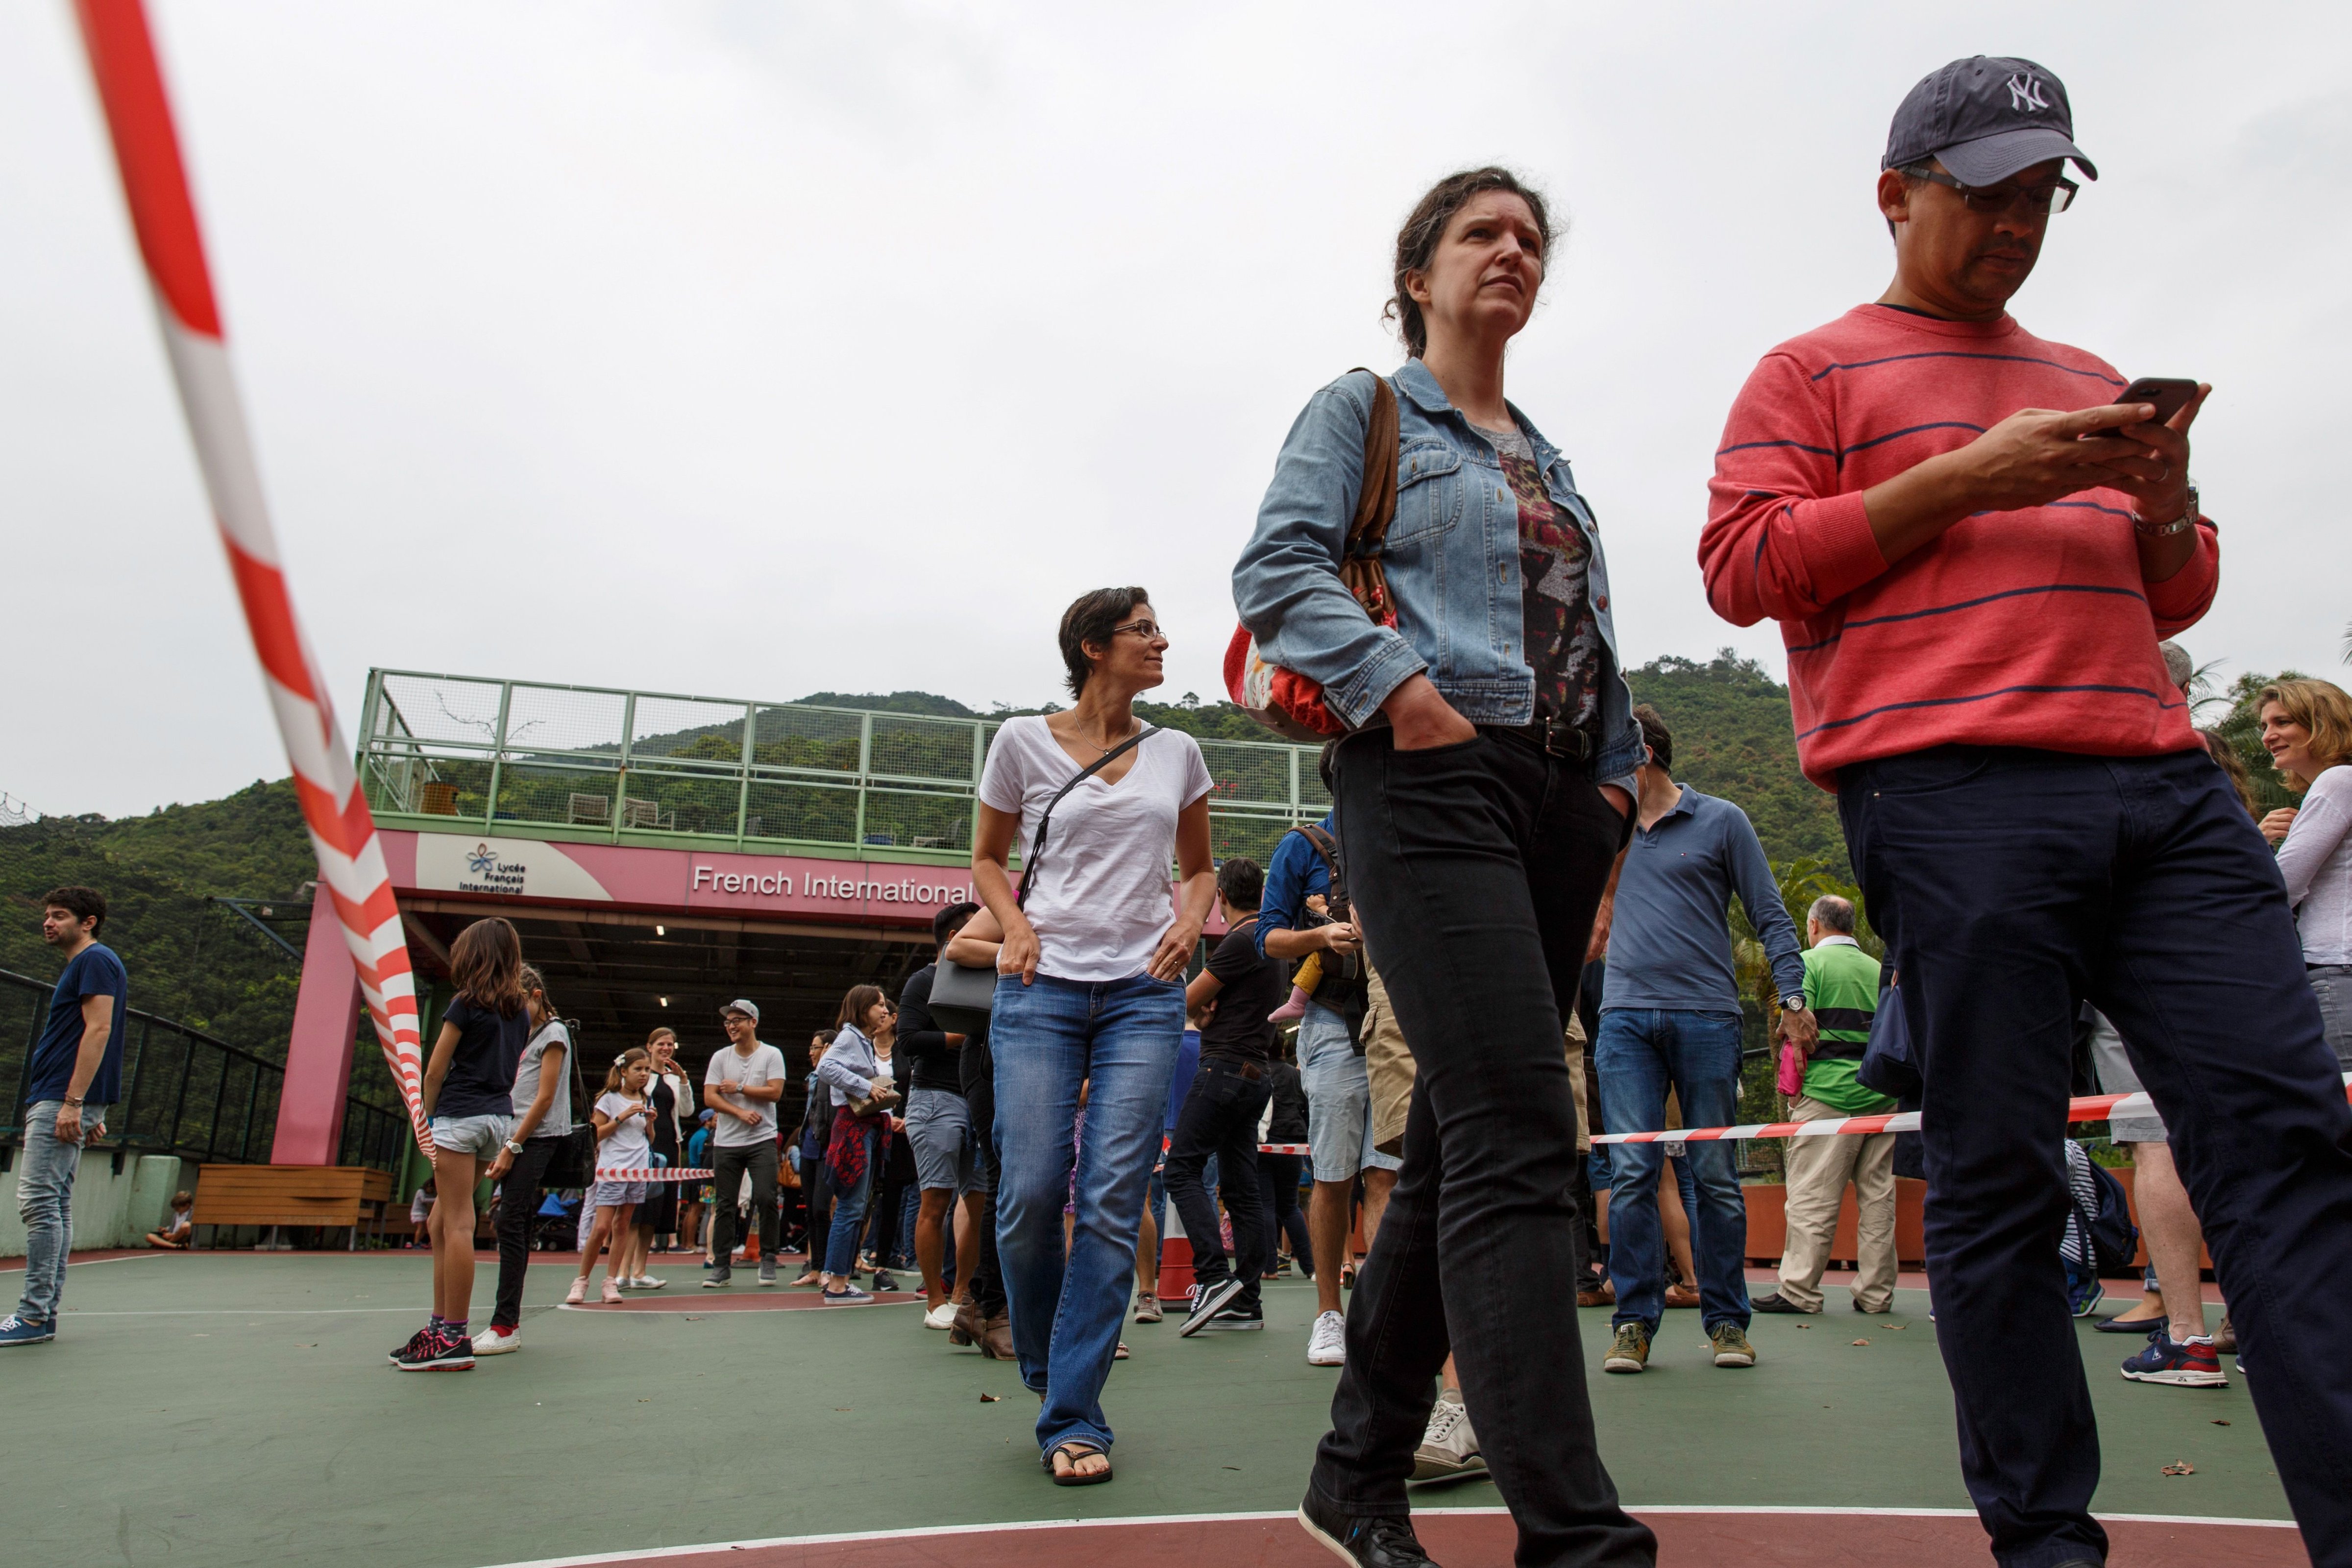 French nationals residing in Hong Kong wait in line to vote in the first round of France's presidential election at the French International School in Hong Kong, April 23, 2017. (Tengku Bahar—AFP/Getty Images)